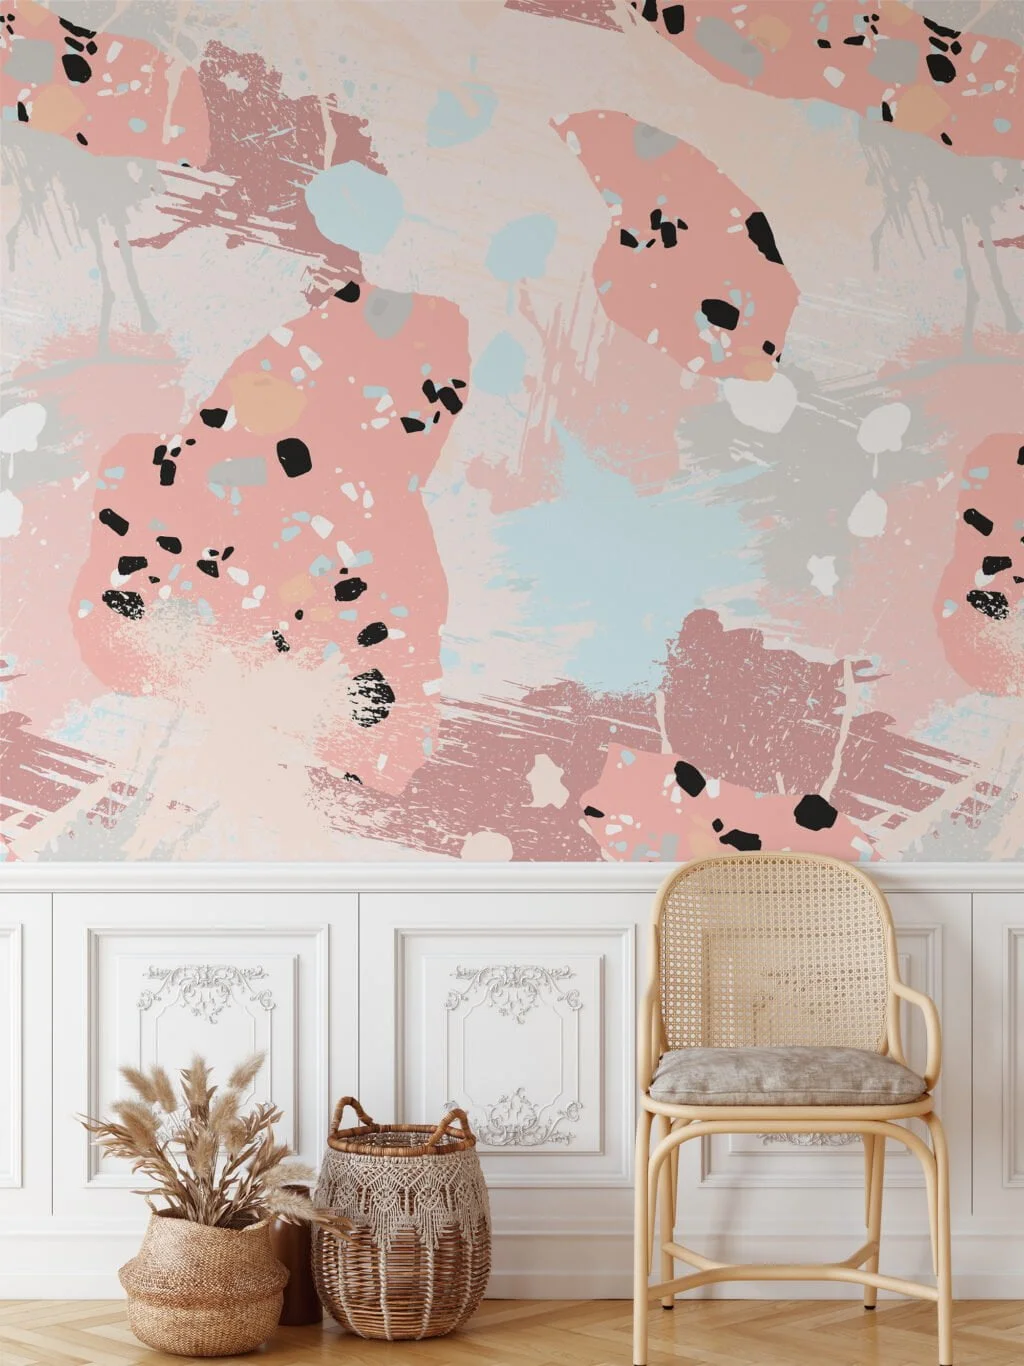 Abstract Peach Splashes Illustration Wallpaper, Abstract Brush Strokes & Speckles Peel & Stick Wall Mural